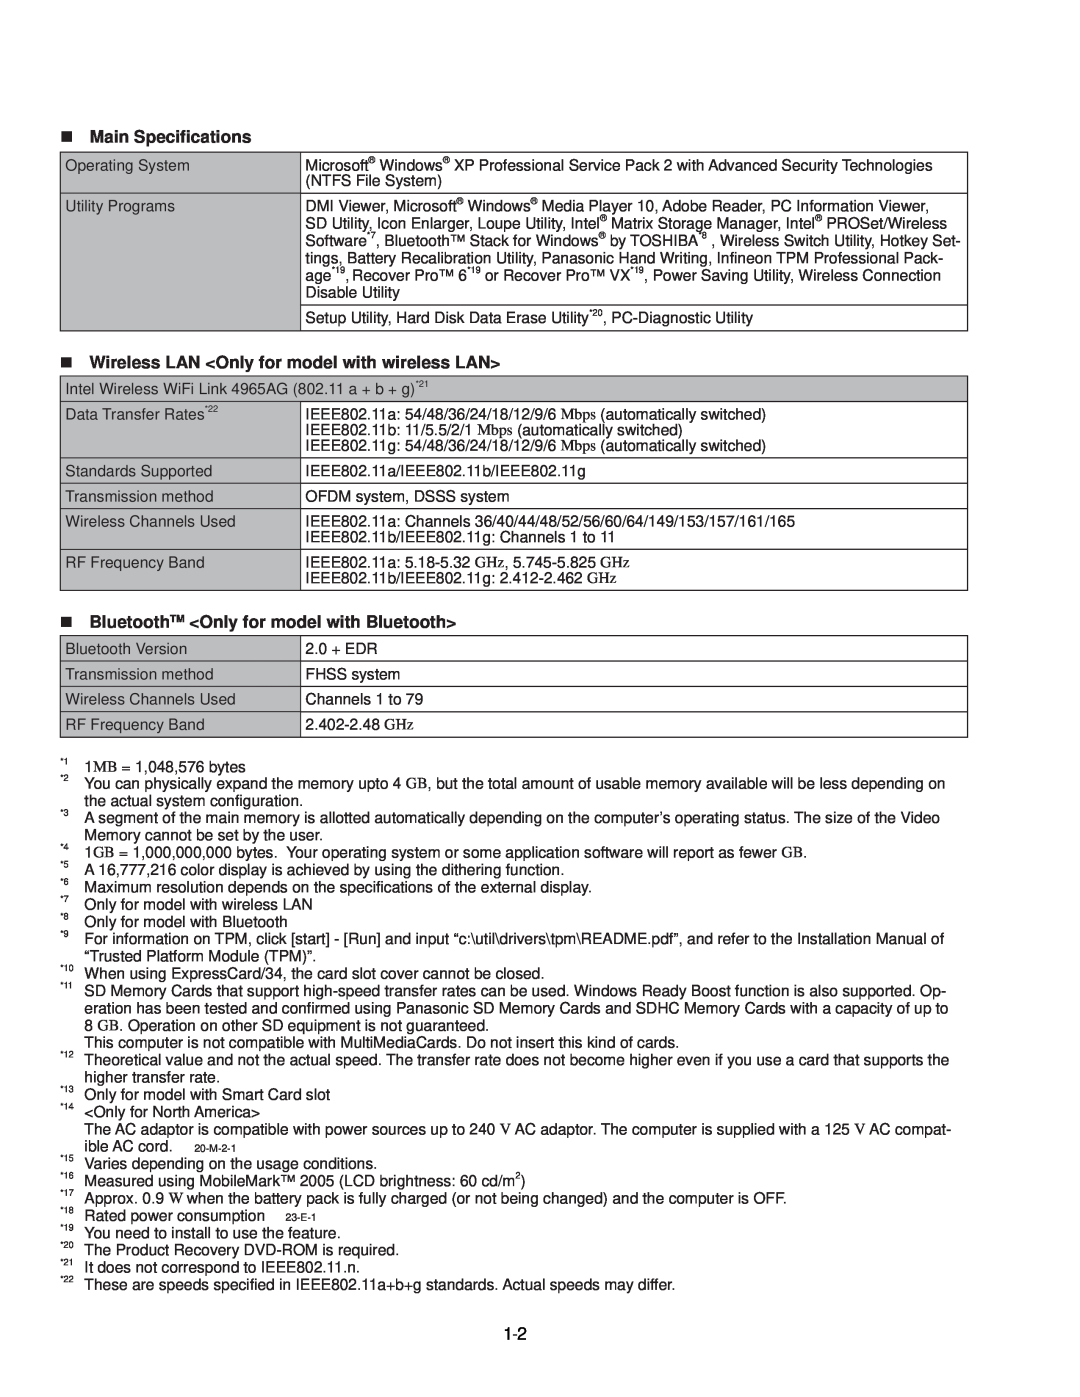 Philips CF-30FTSAZAM service manual Main Specifications, Wireless LAN <Only for model with wireless LAN> 